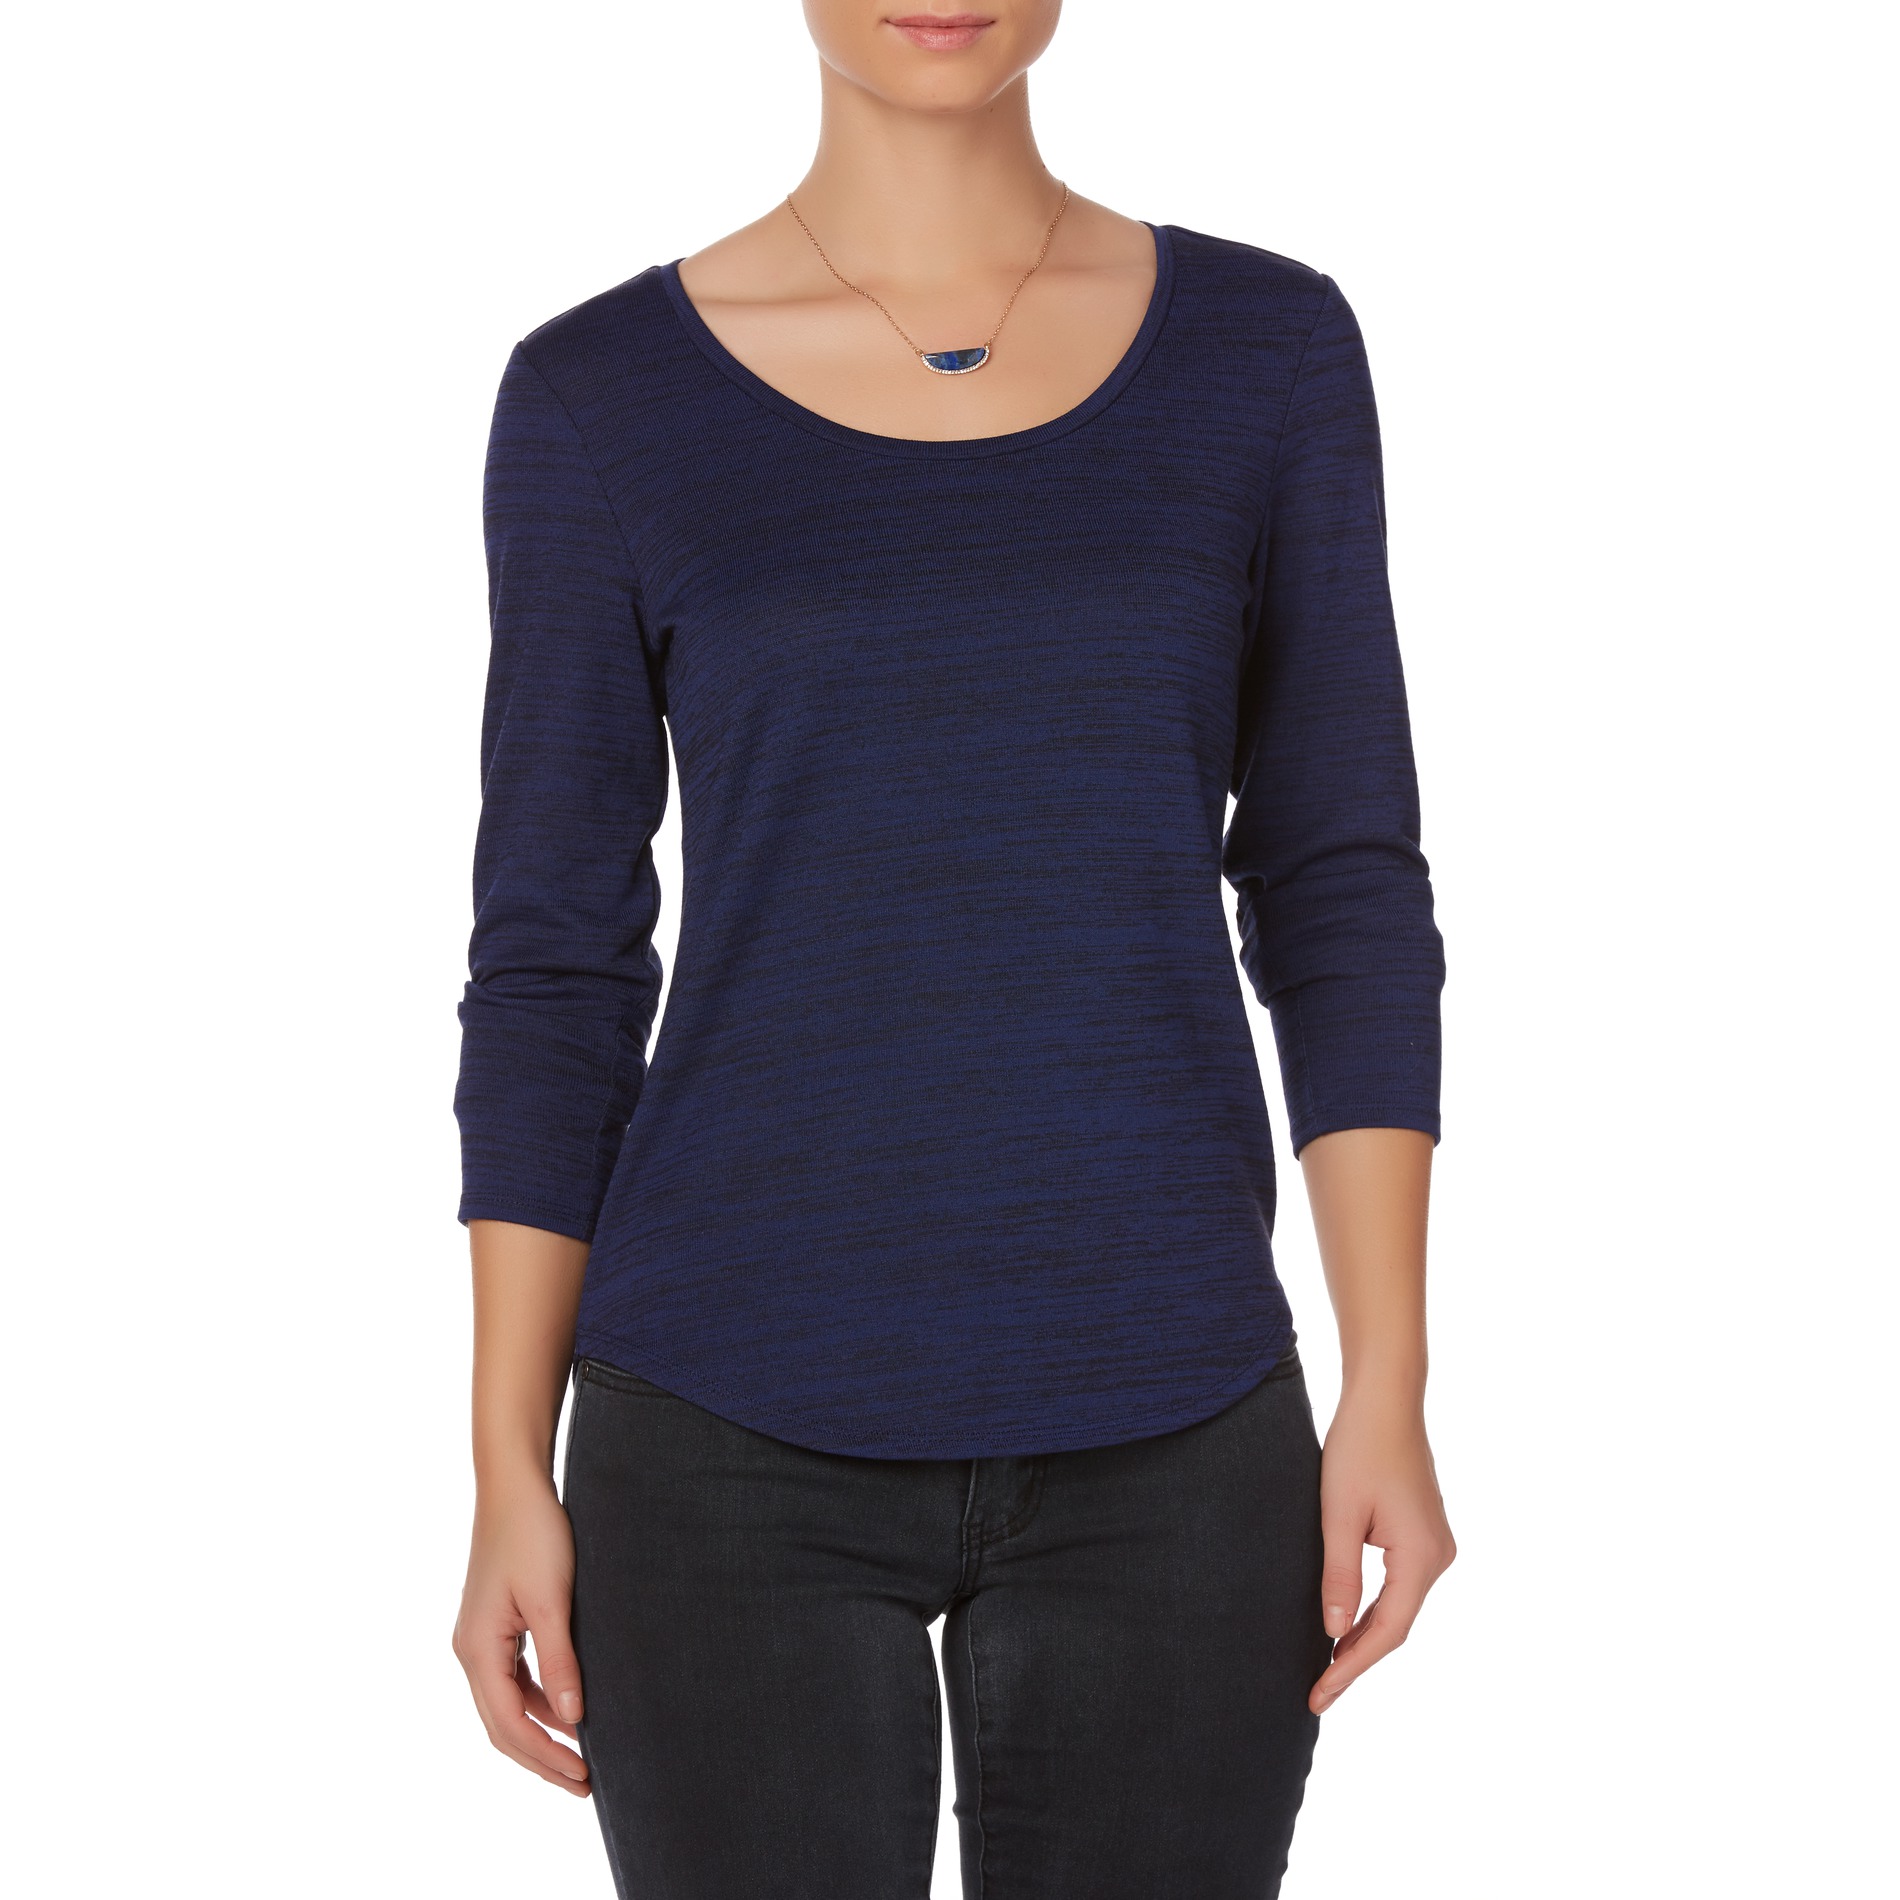 Simply Styled Women's Scoop Neck Top - Marled